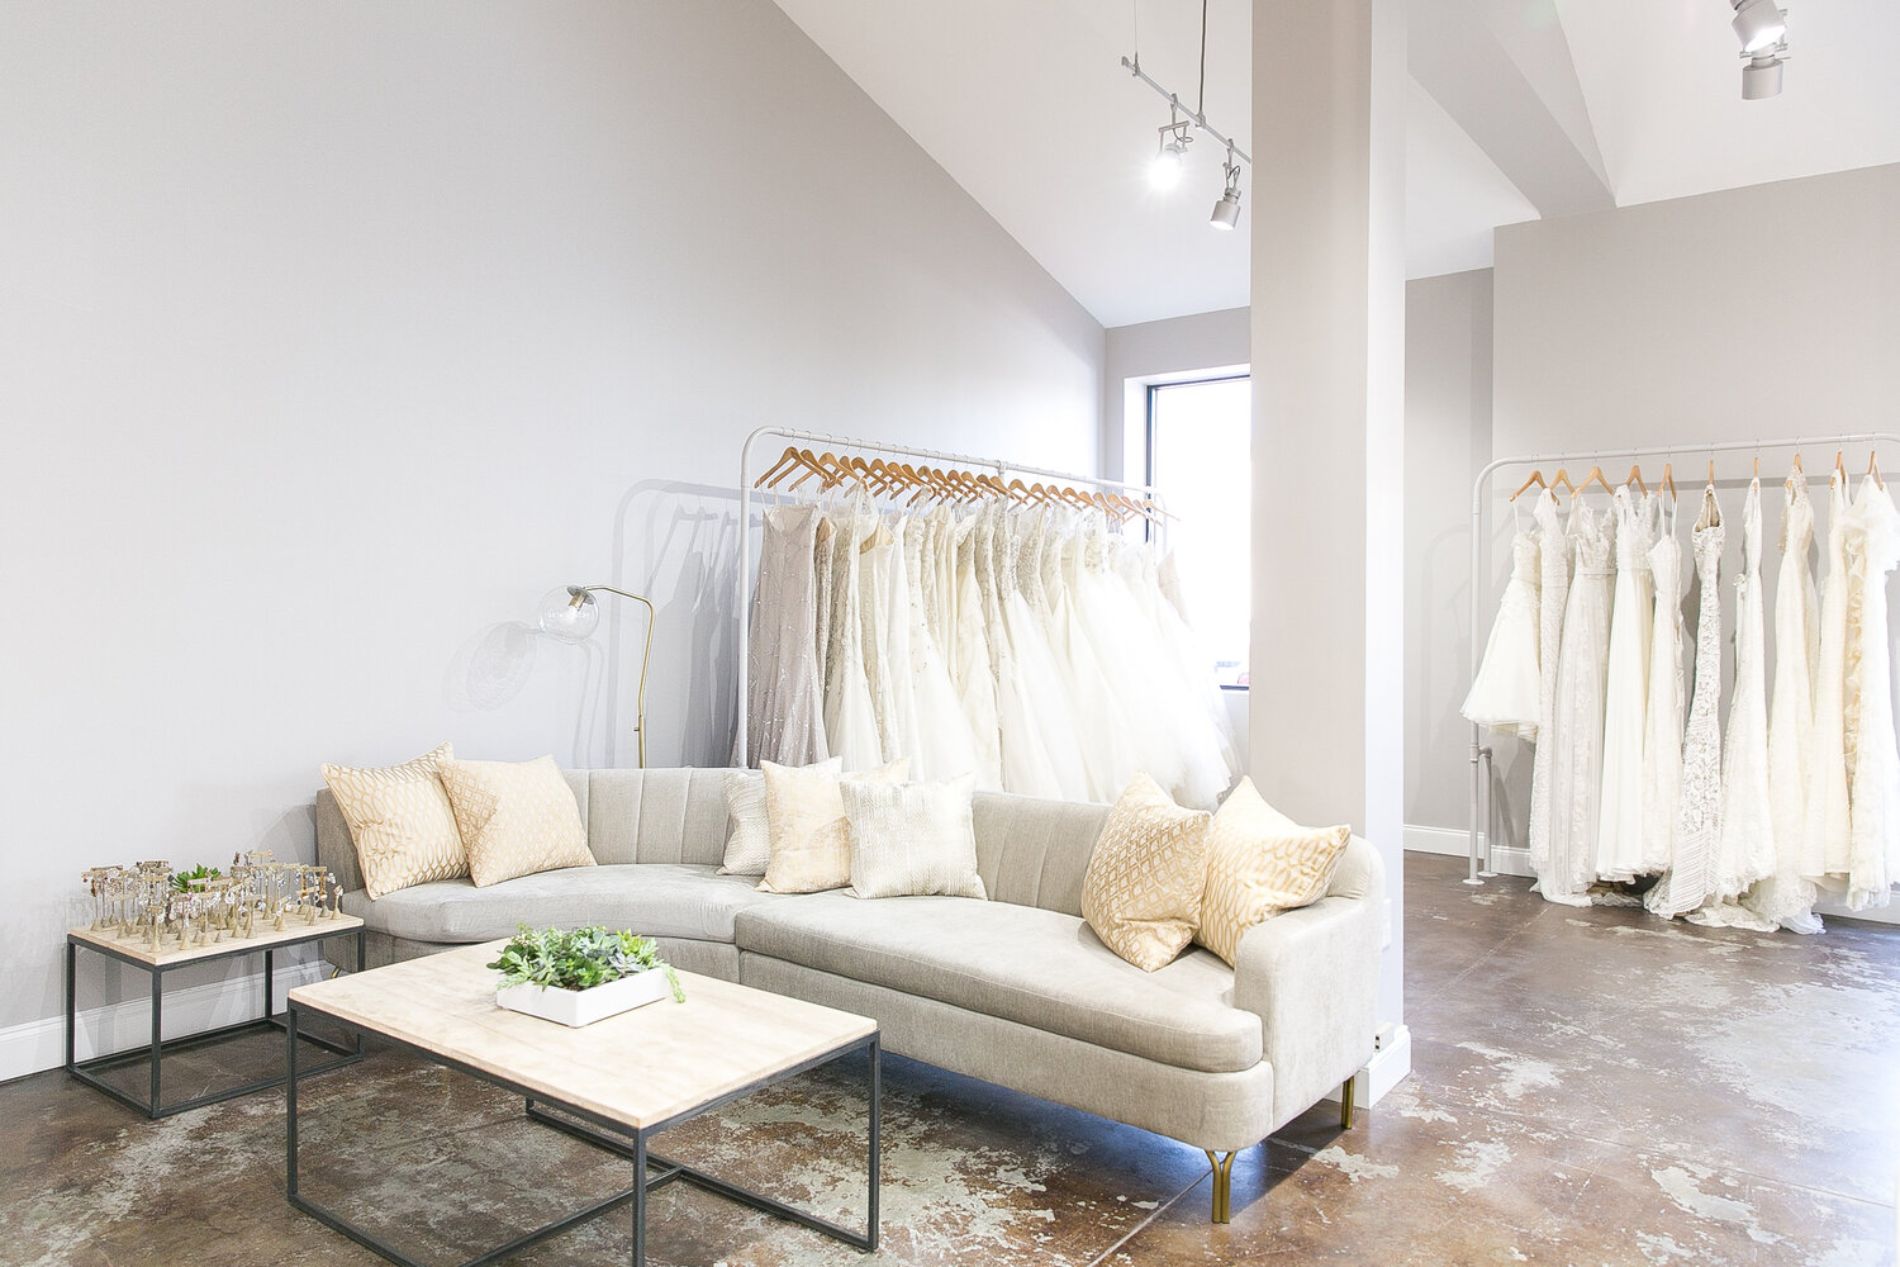 Room with couch and racks of wedding dresses